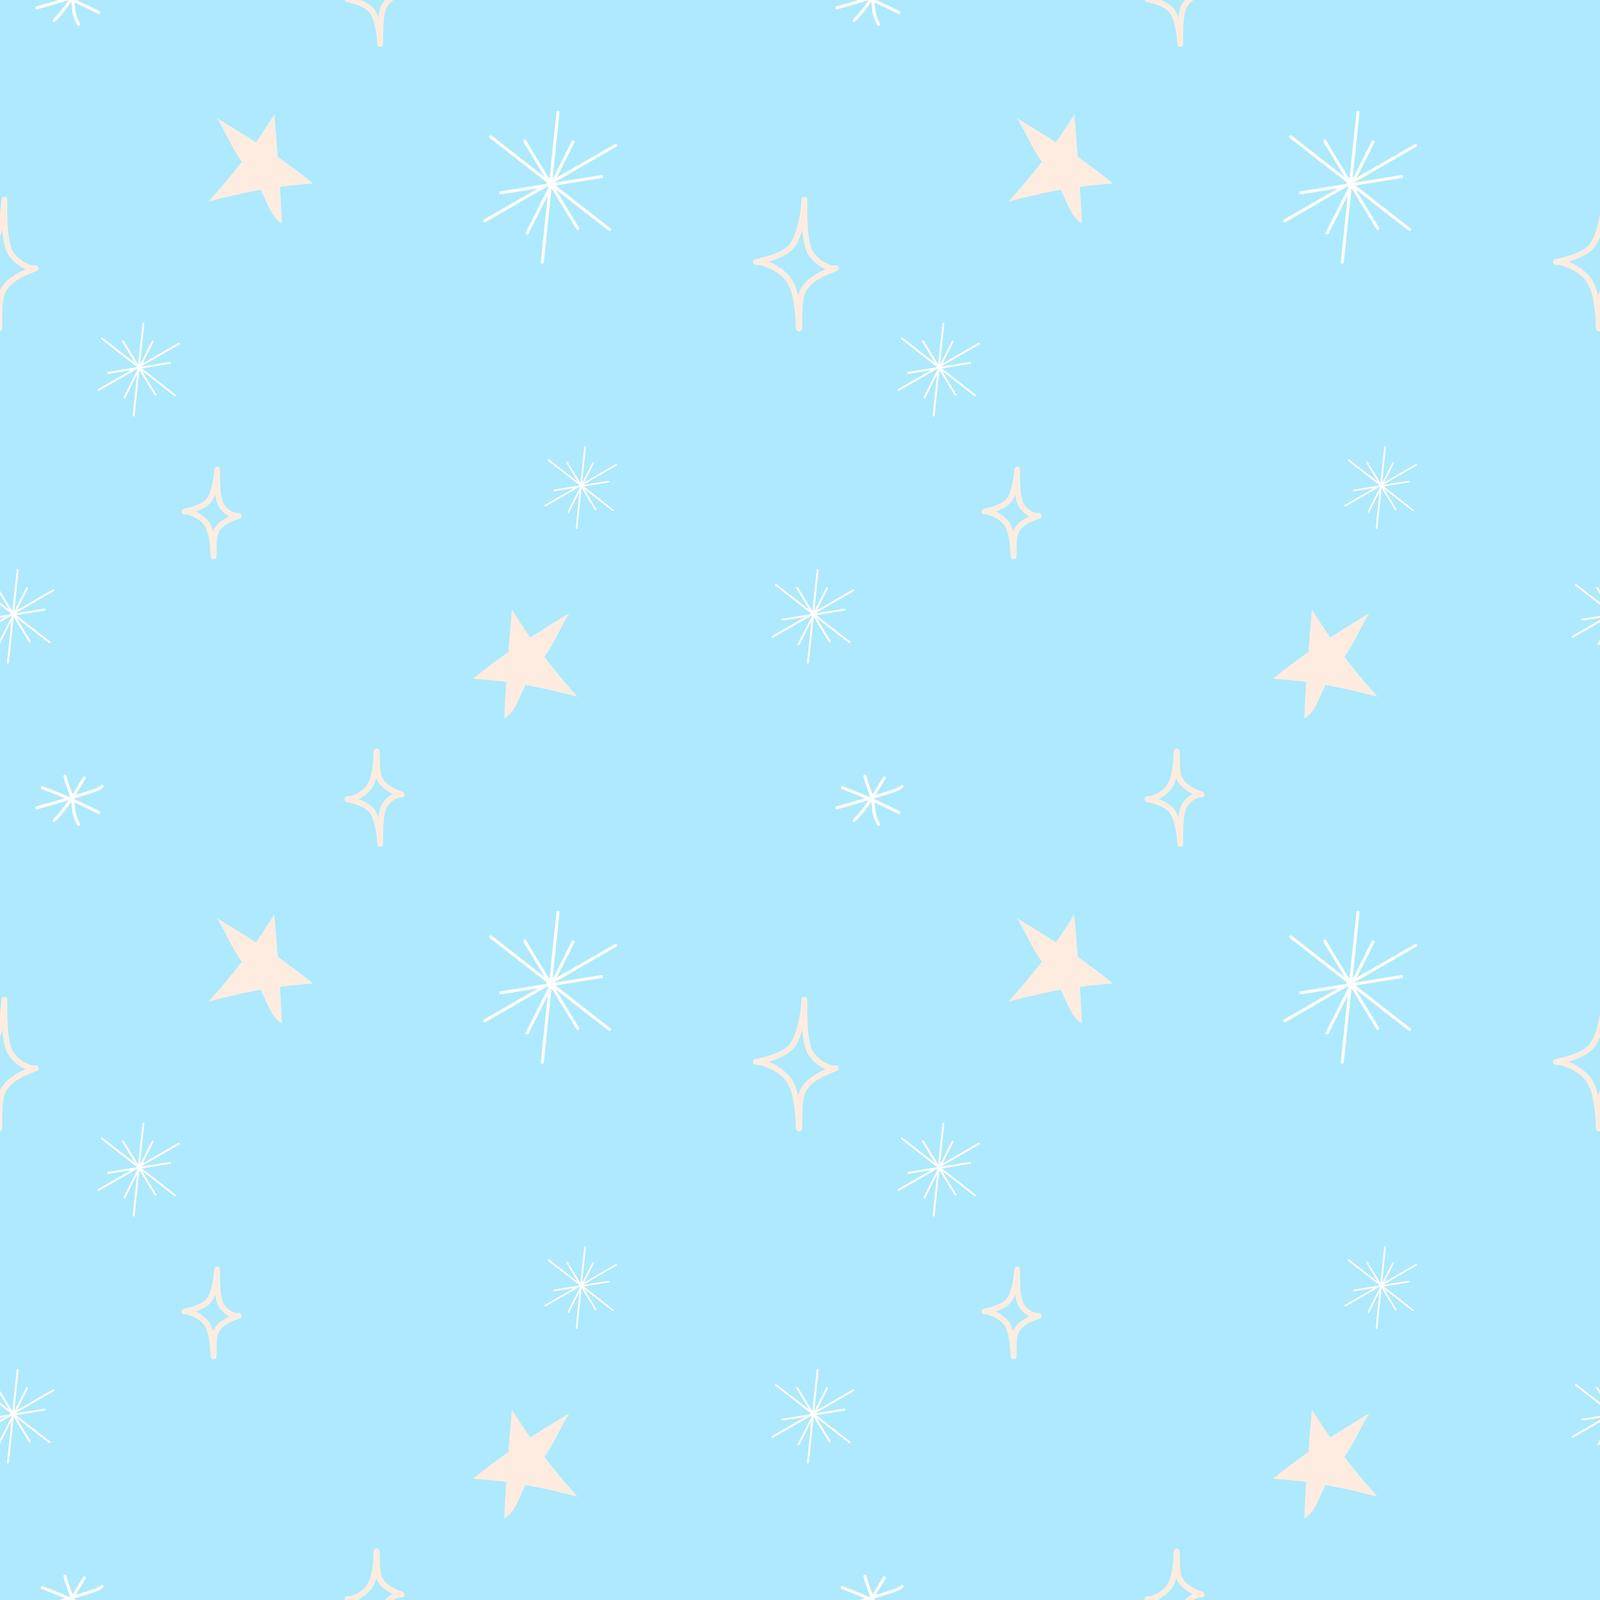 Vector seamless hand drawn simple snow pattern. Winter background with snowfall and stars illustration